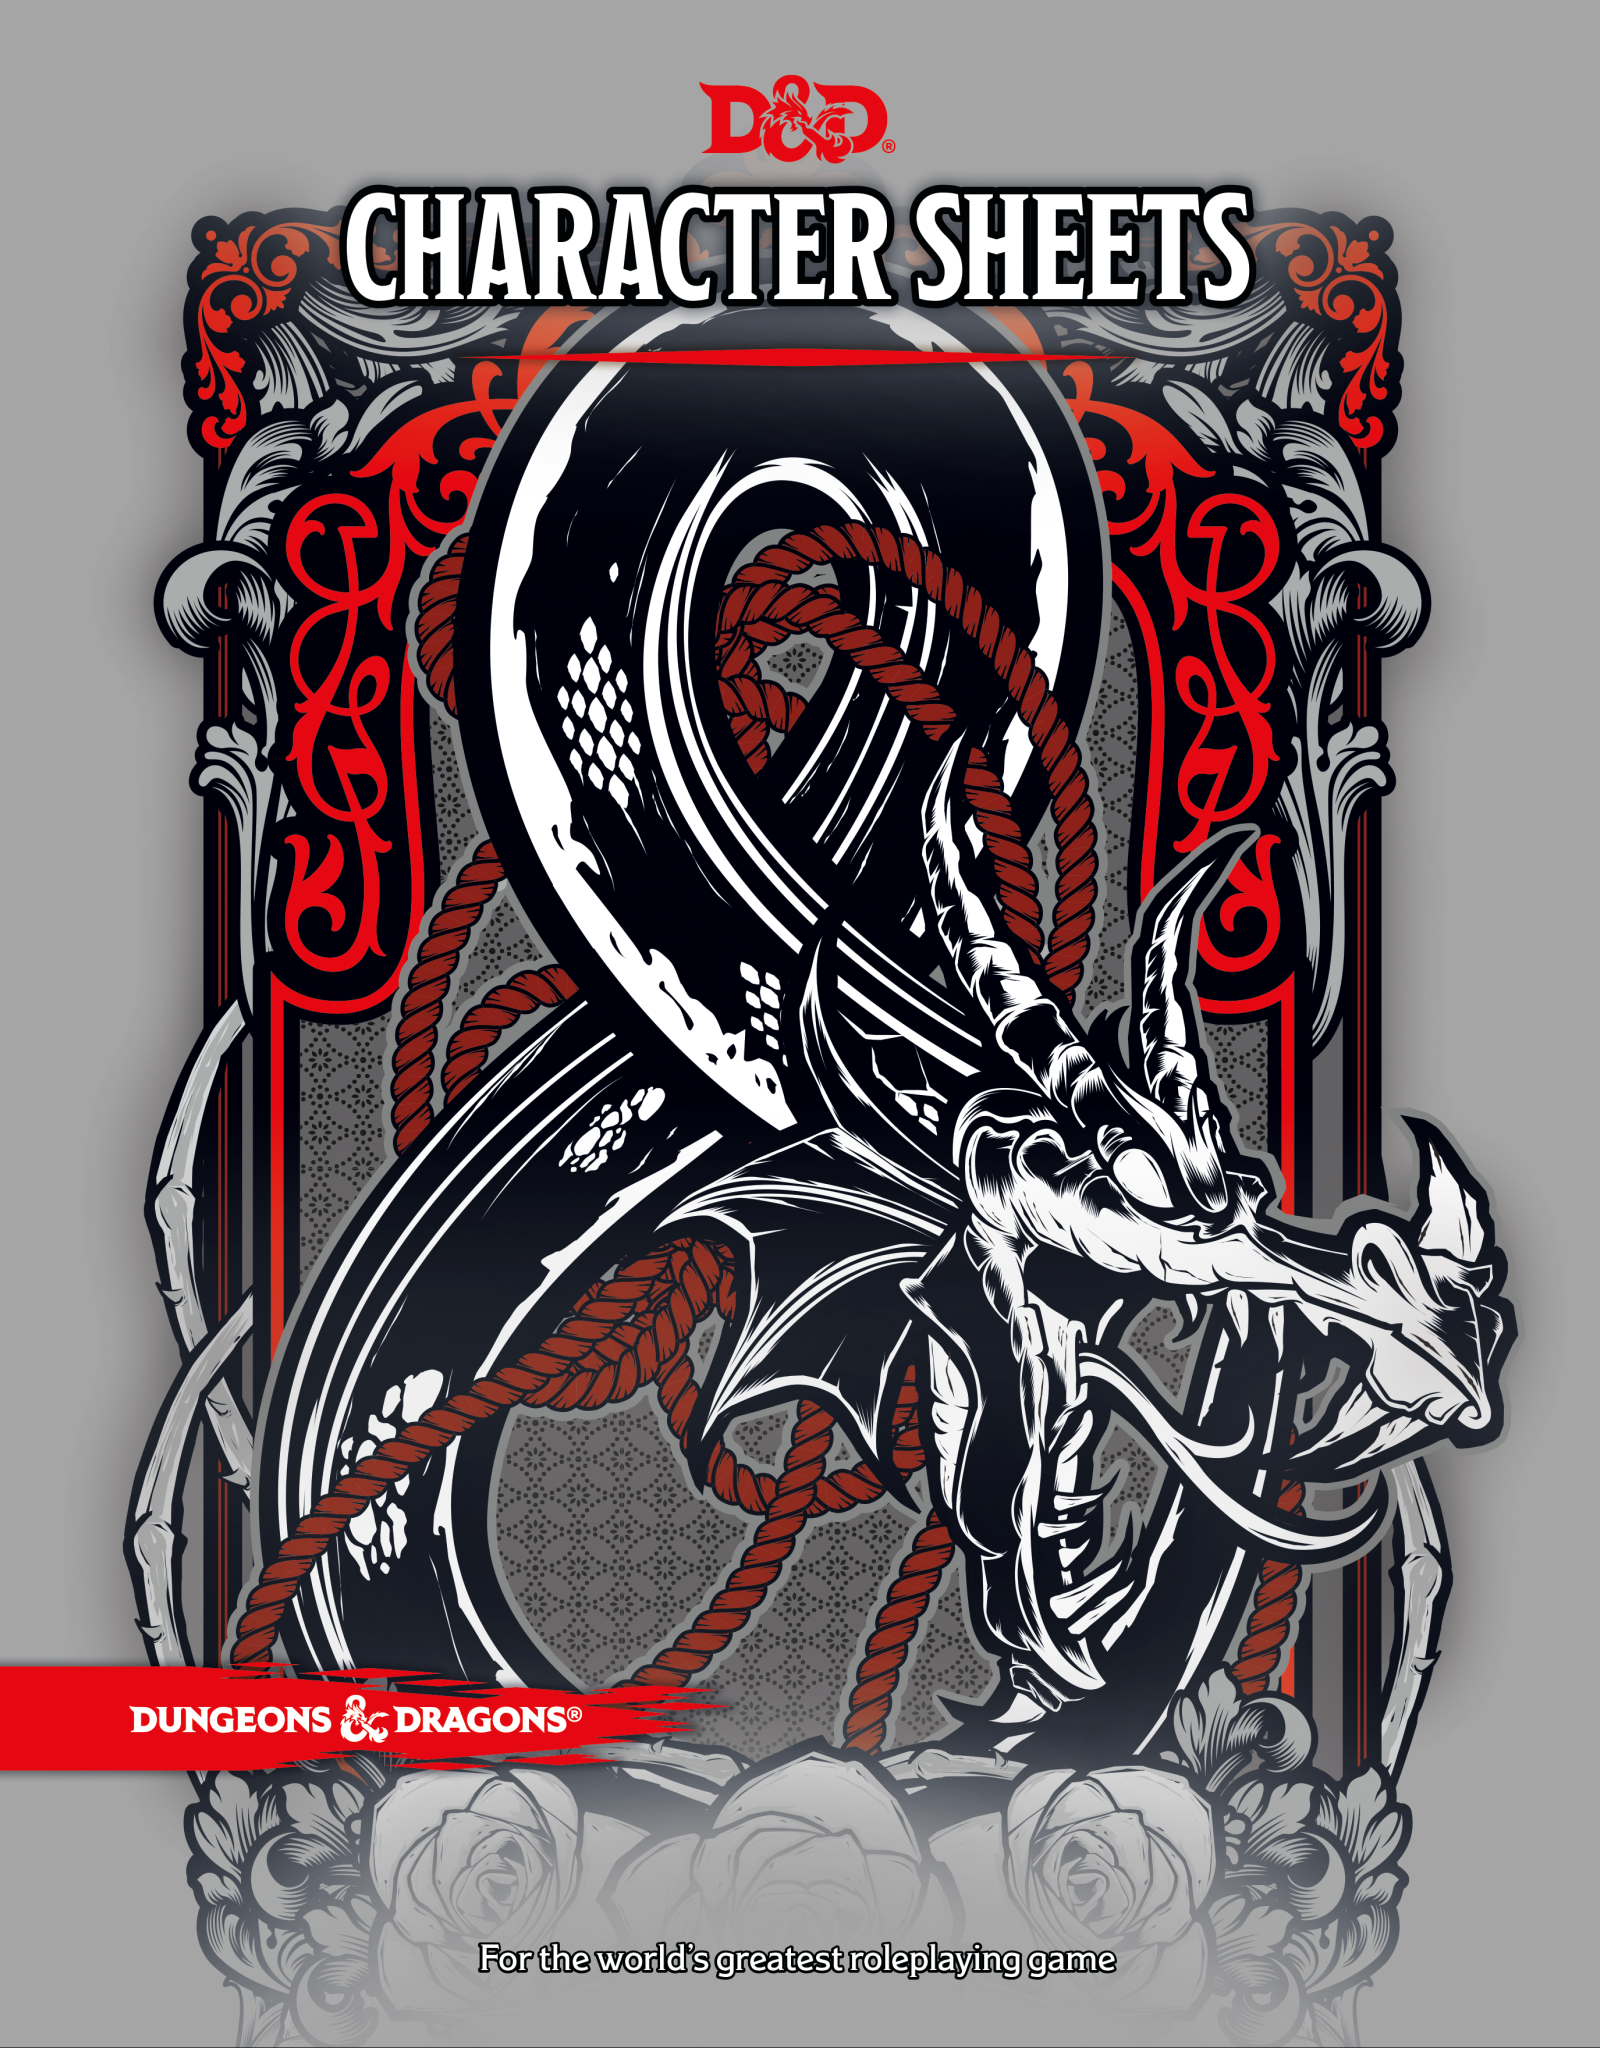 Dungeons & Dragons D&D 5e: Character Sheets